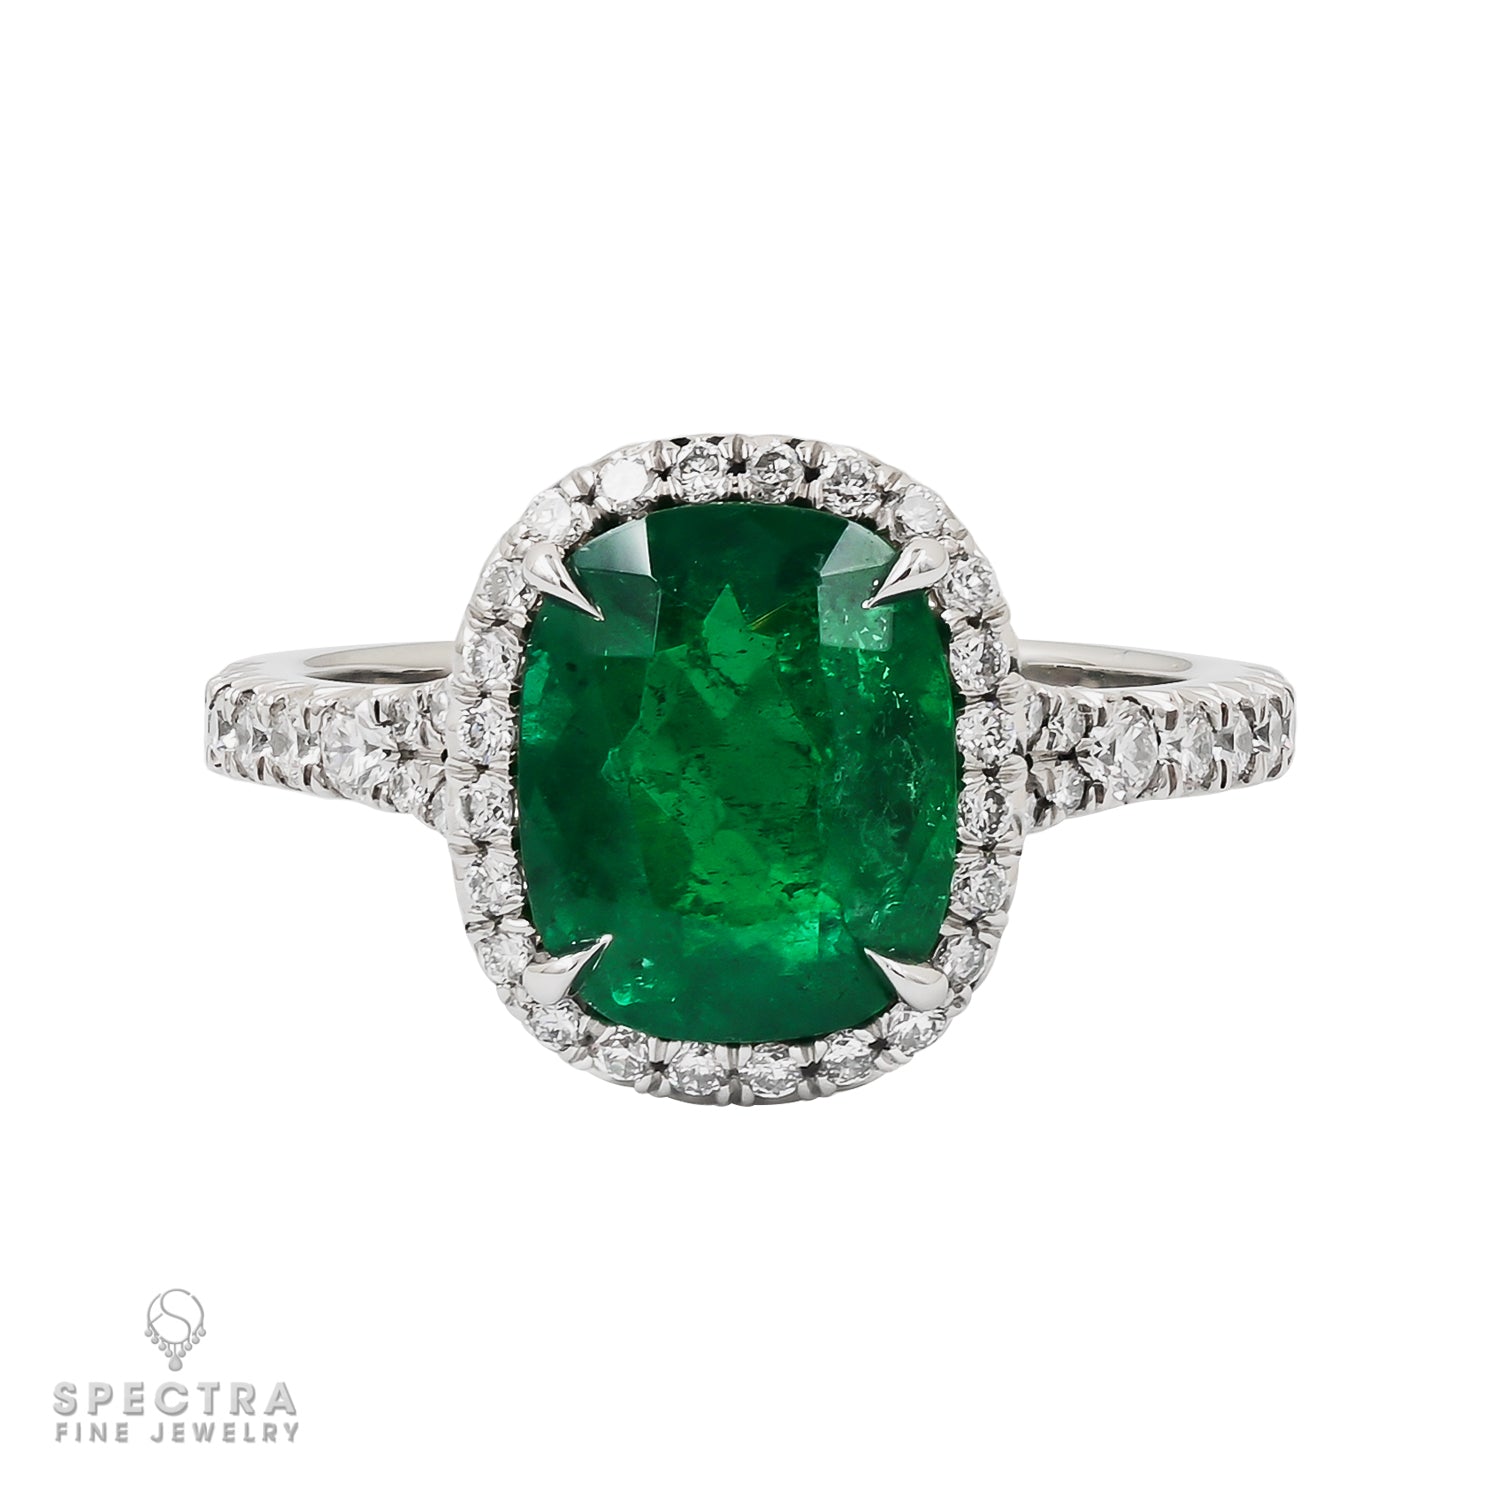 Spectra Fine Jewelry 2.26cts Emerald and Diamond Ring